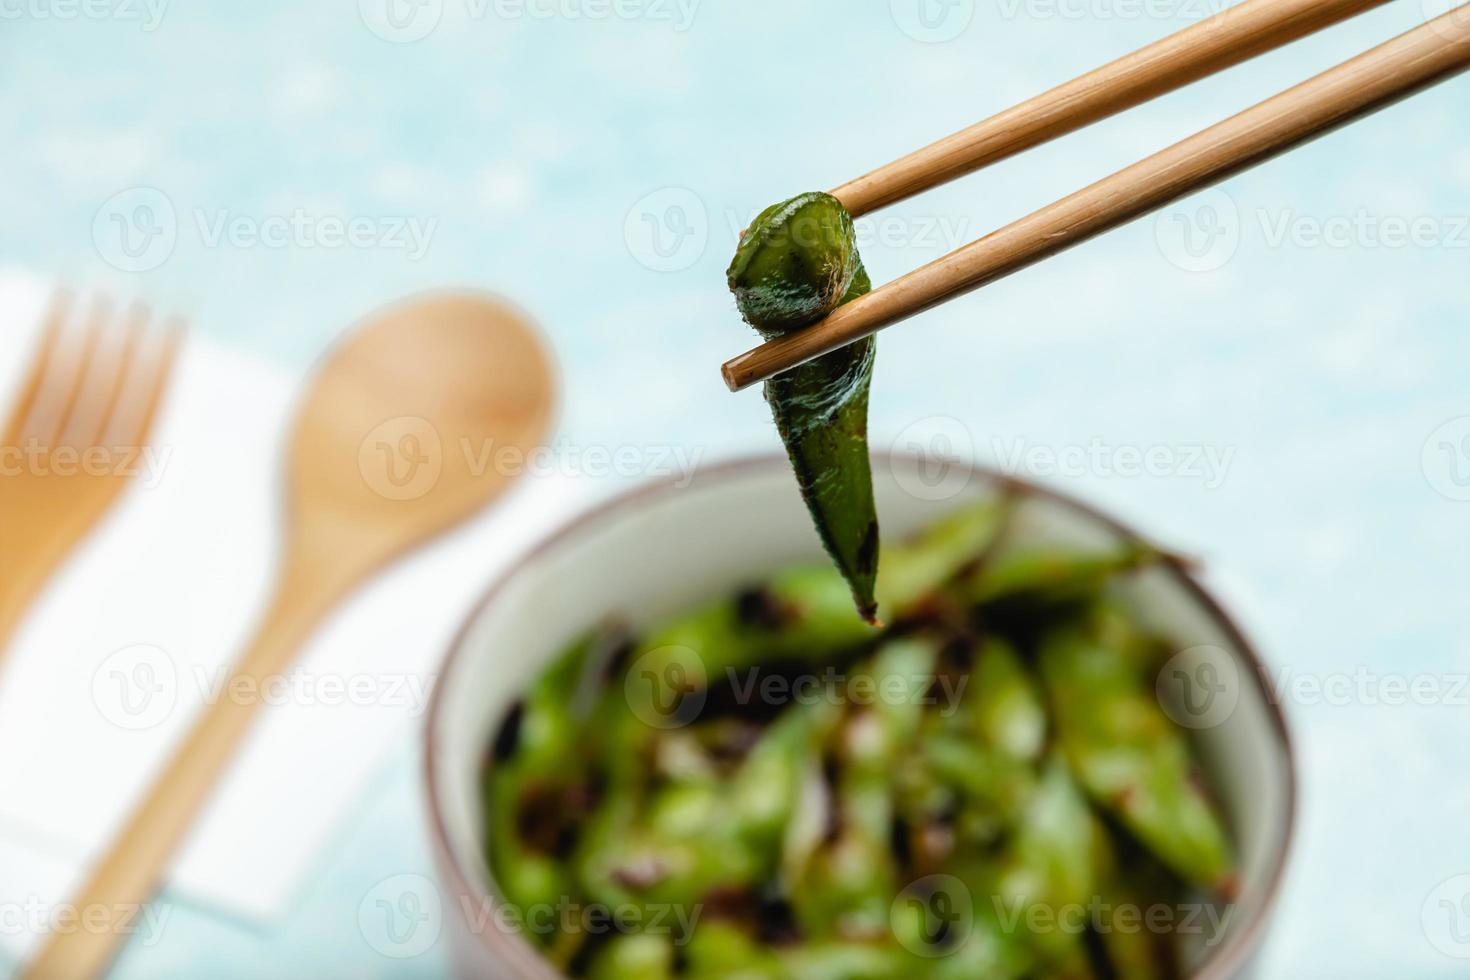 Cooked edamame on a blue tabletop. Snack soybean pods photo